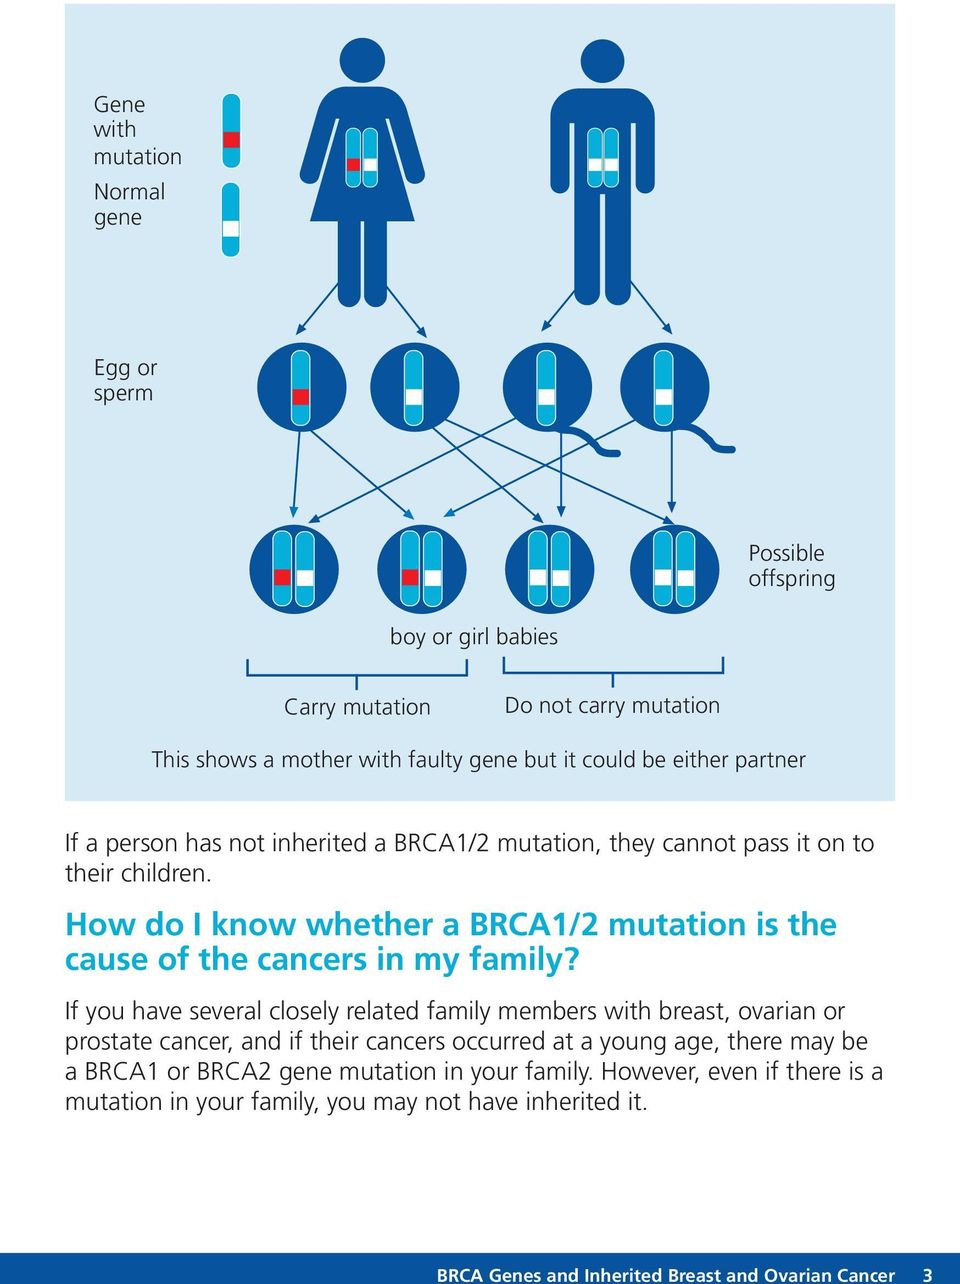 How do I know whether a BRCA1/2 mutation is the cause of the cancers in my family?